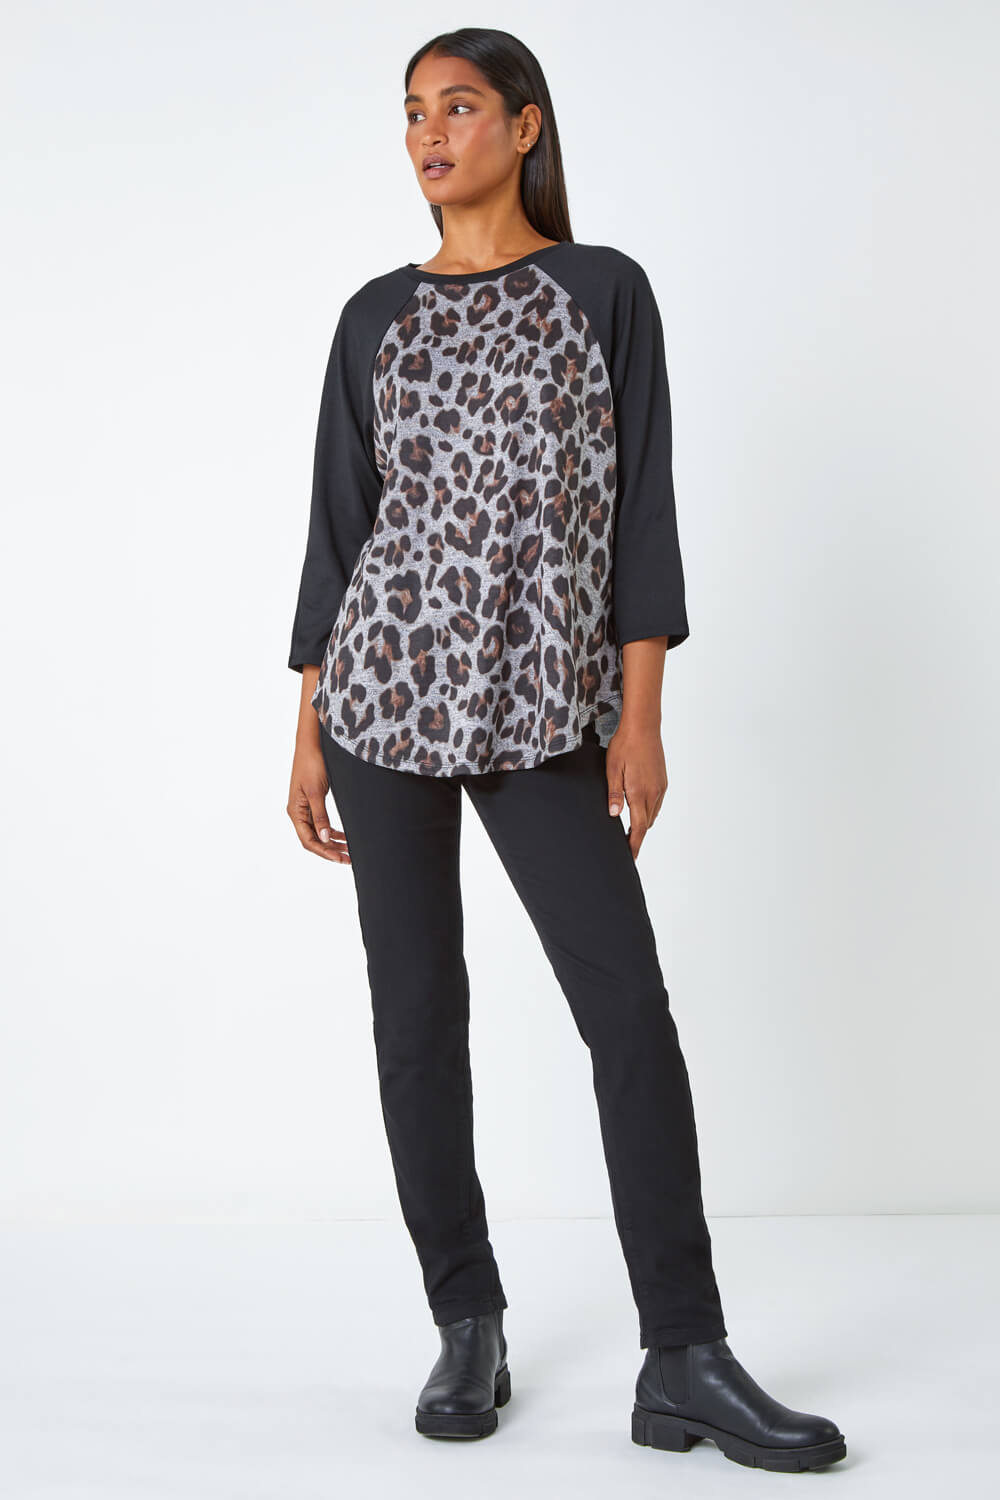 Natural  Animal Print Stretch Top, Image 2 of 5